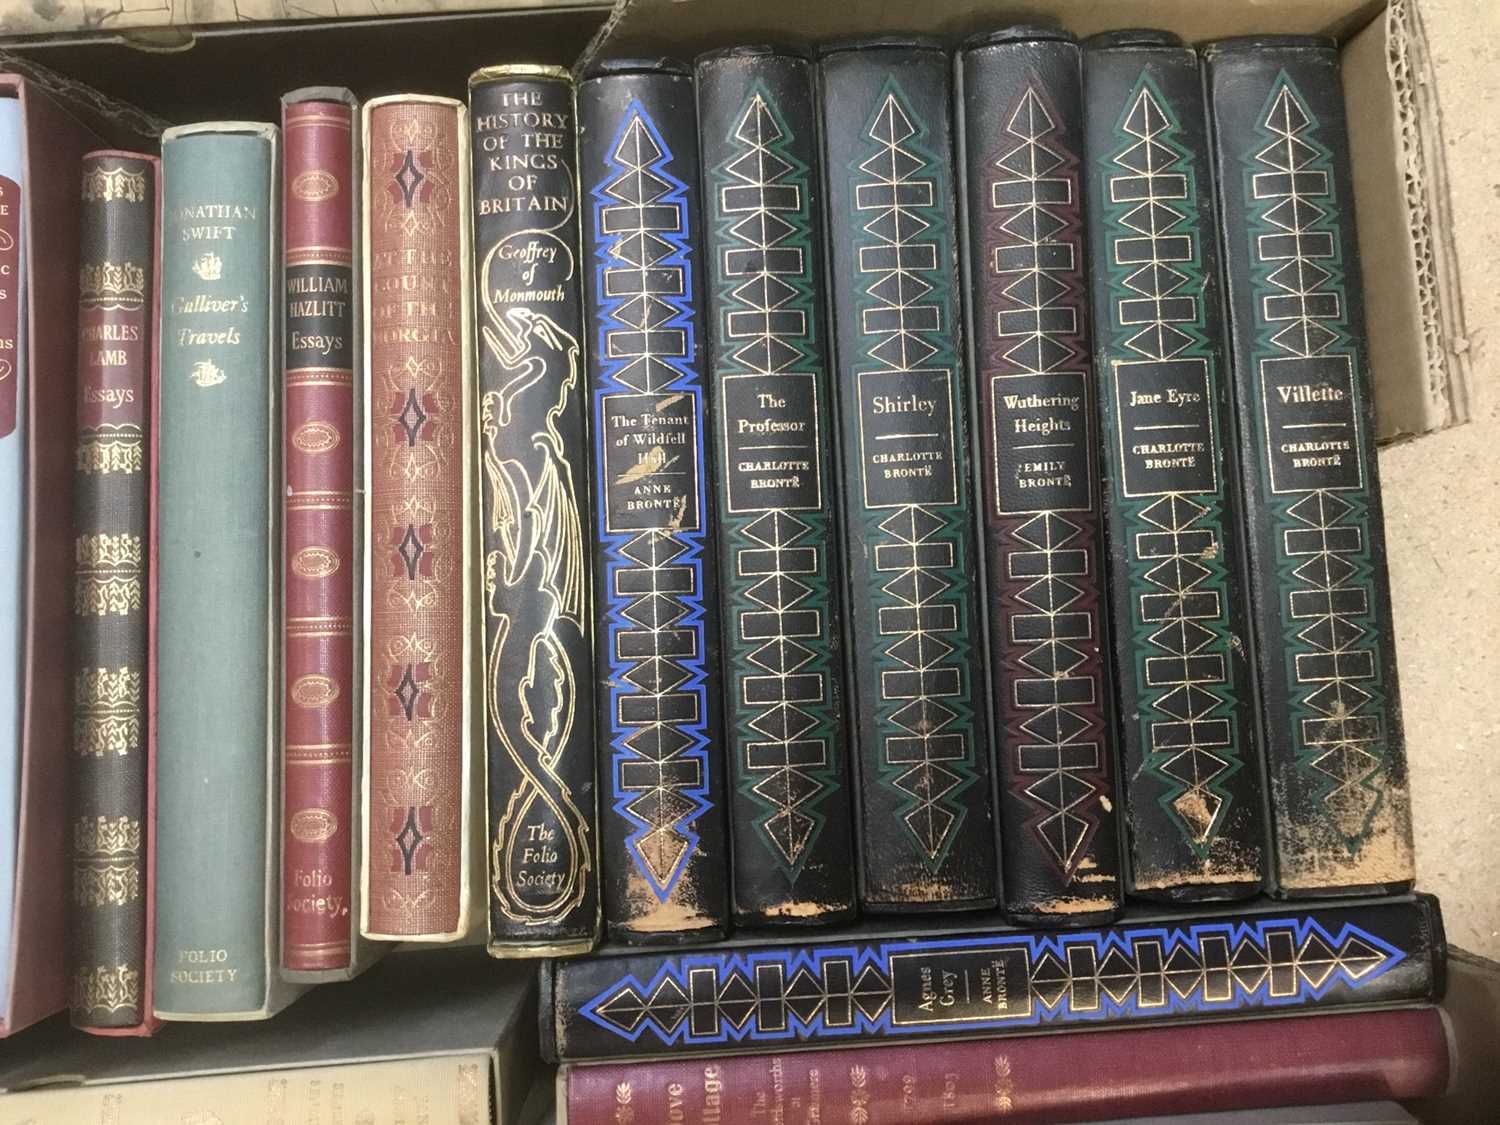 Folio society, new box of books, approximately 31 books including Works of Jane Austin and others - Image 5 of 6